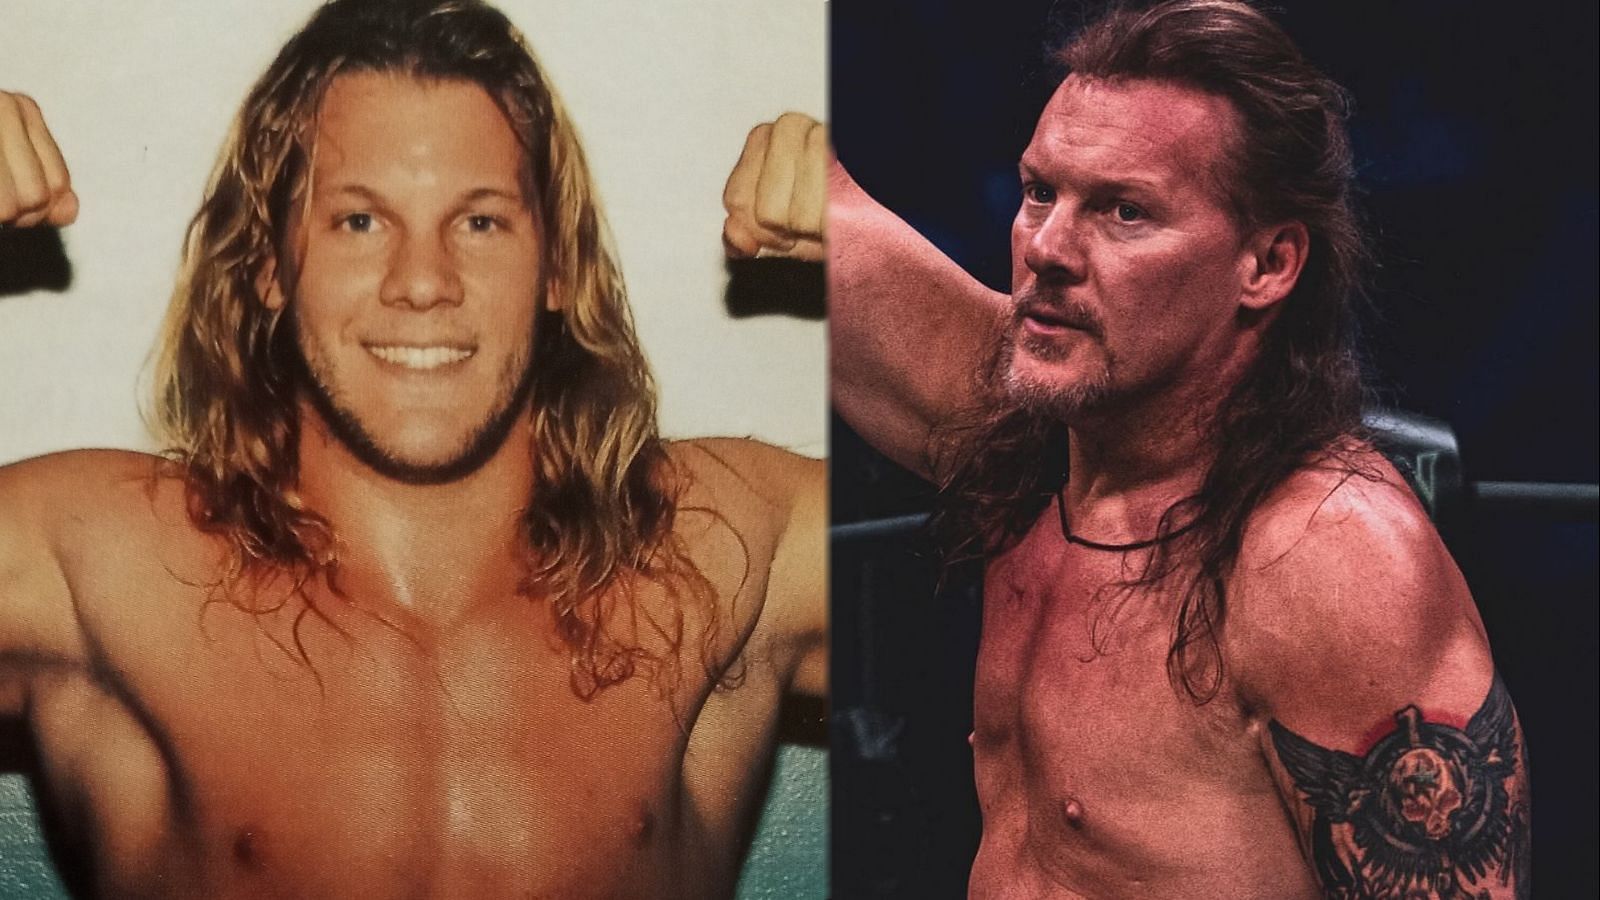 Jericho before breaking into wrestling, vs. how he looks like today.